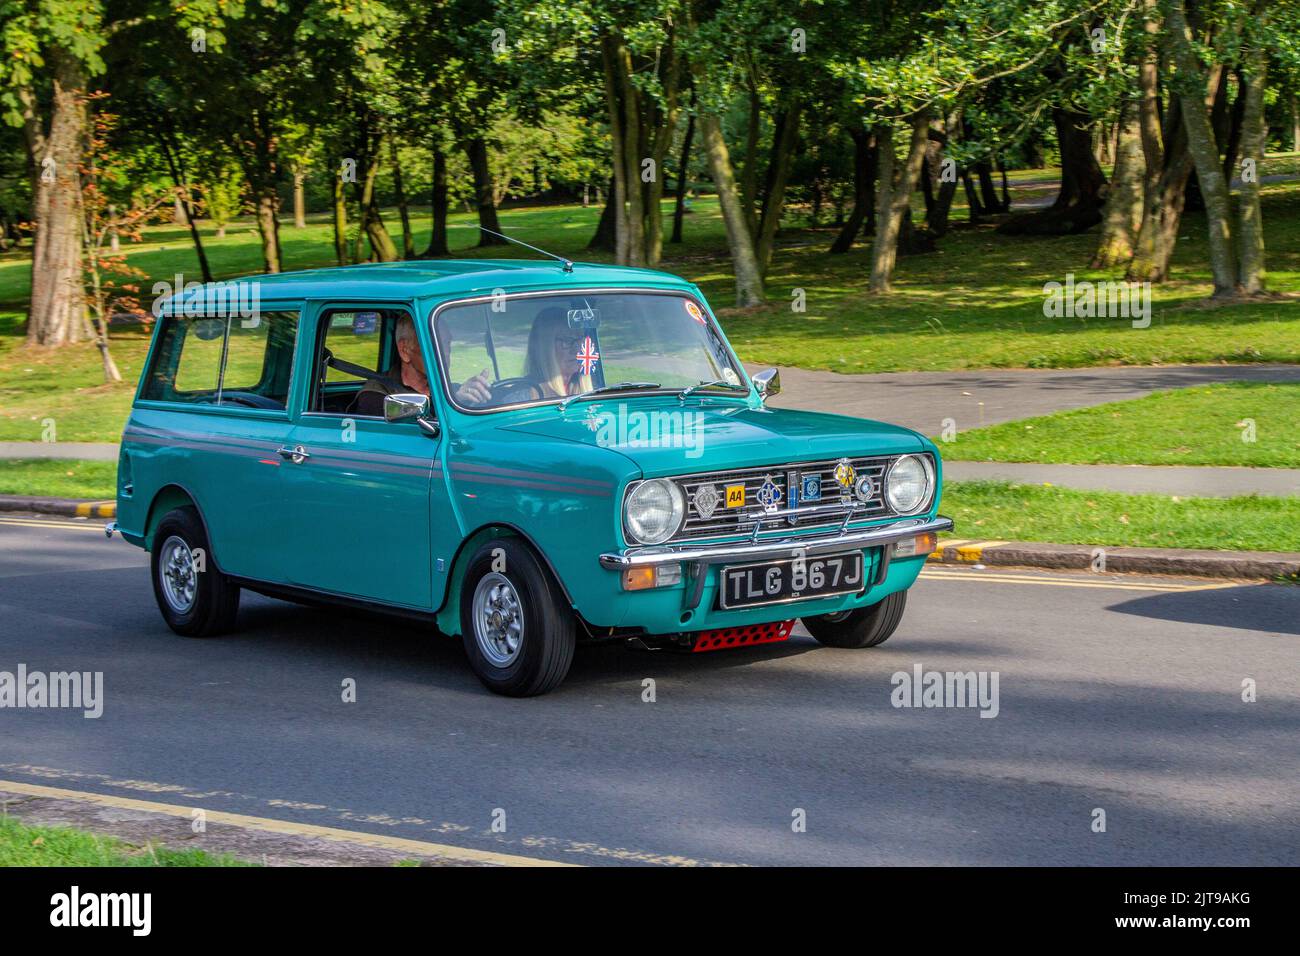 1970 70s anni settanta AUSTIN MINI CLUBMAN Estate 1275cc benzina; arrivo all'annuale Stanley Park Classic Car Show nei Giardini Italiani. Stanley Park Classics Yesteryear Motor Show Hosted by Blackpool Vintage Vehicle Preservation Group, UK. Foto Stock